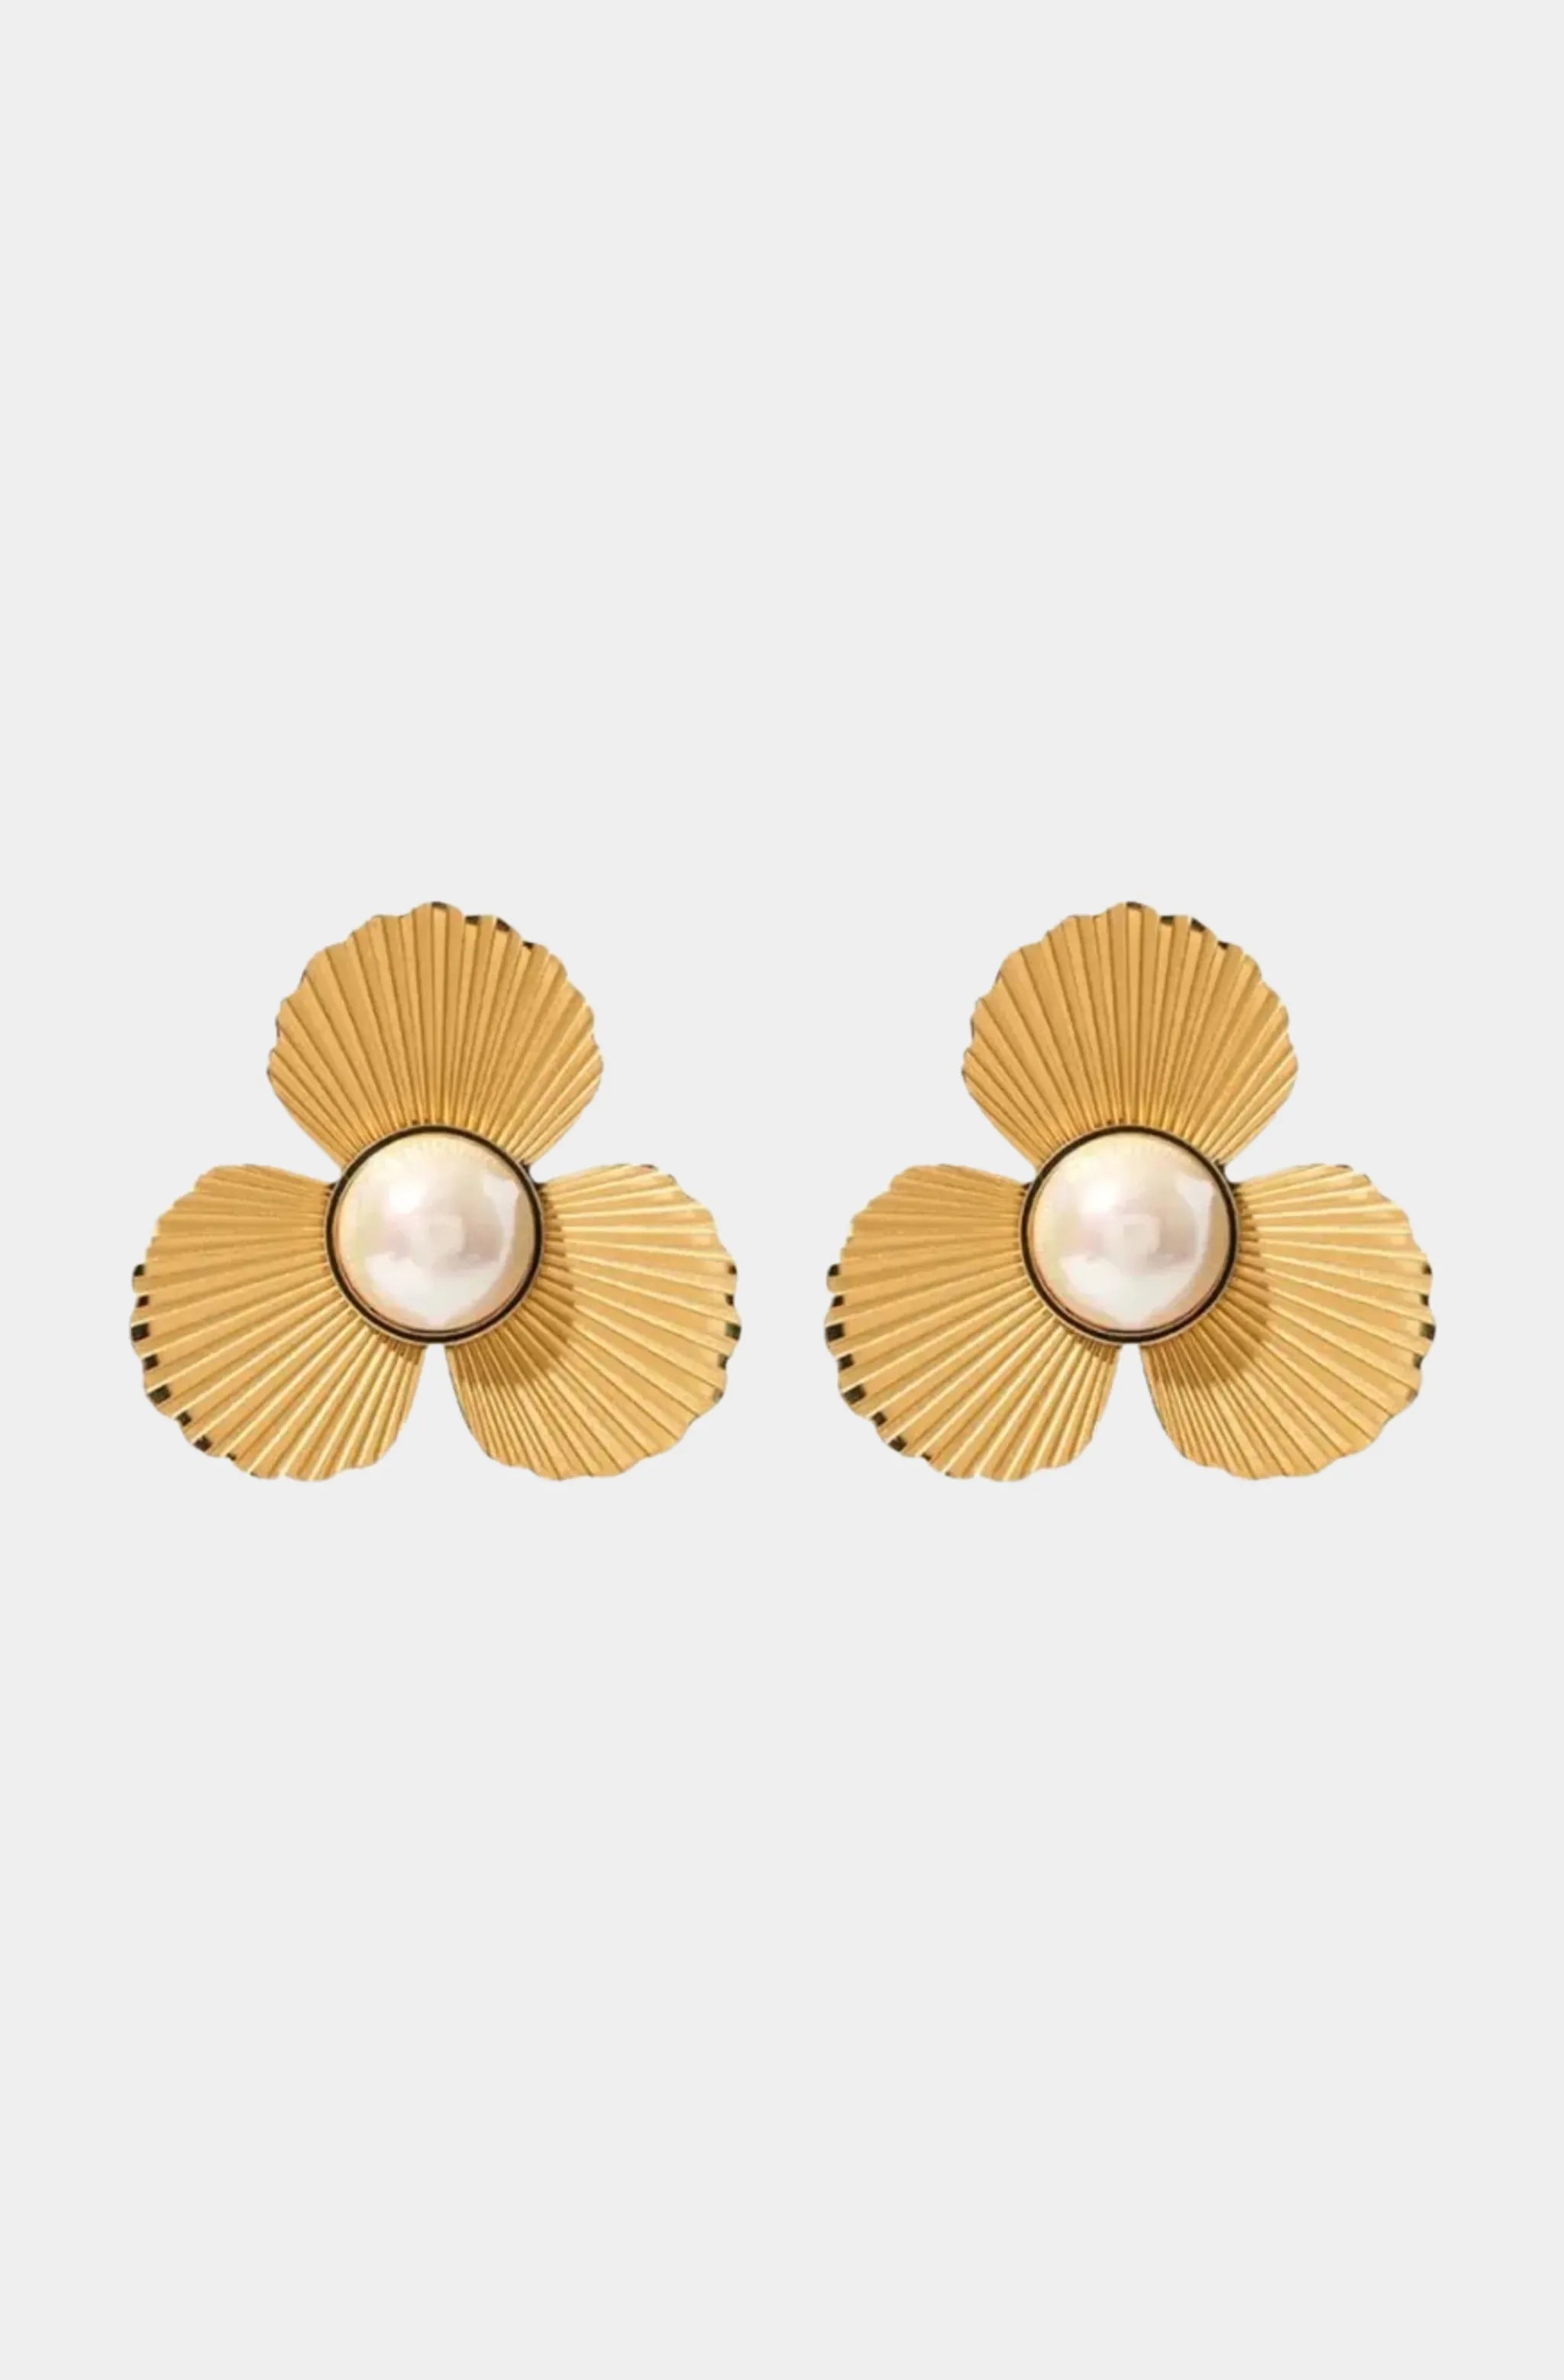 Petals and Pearl Studs Earrings